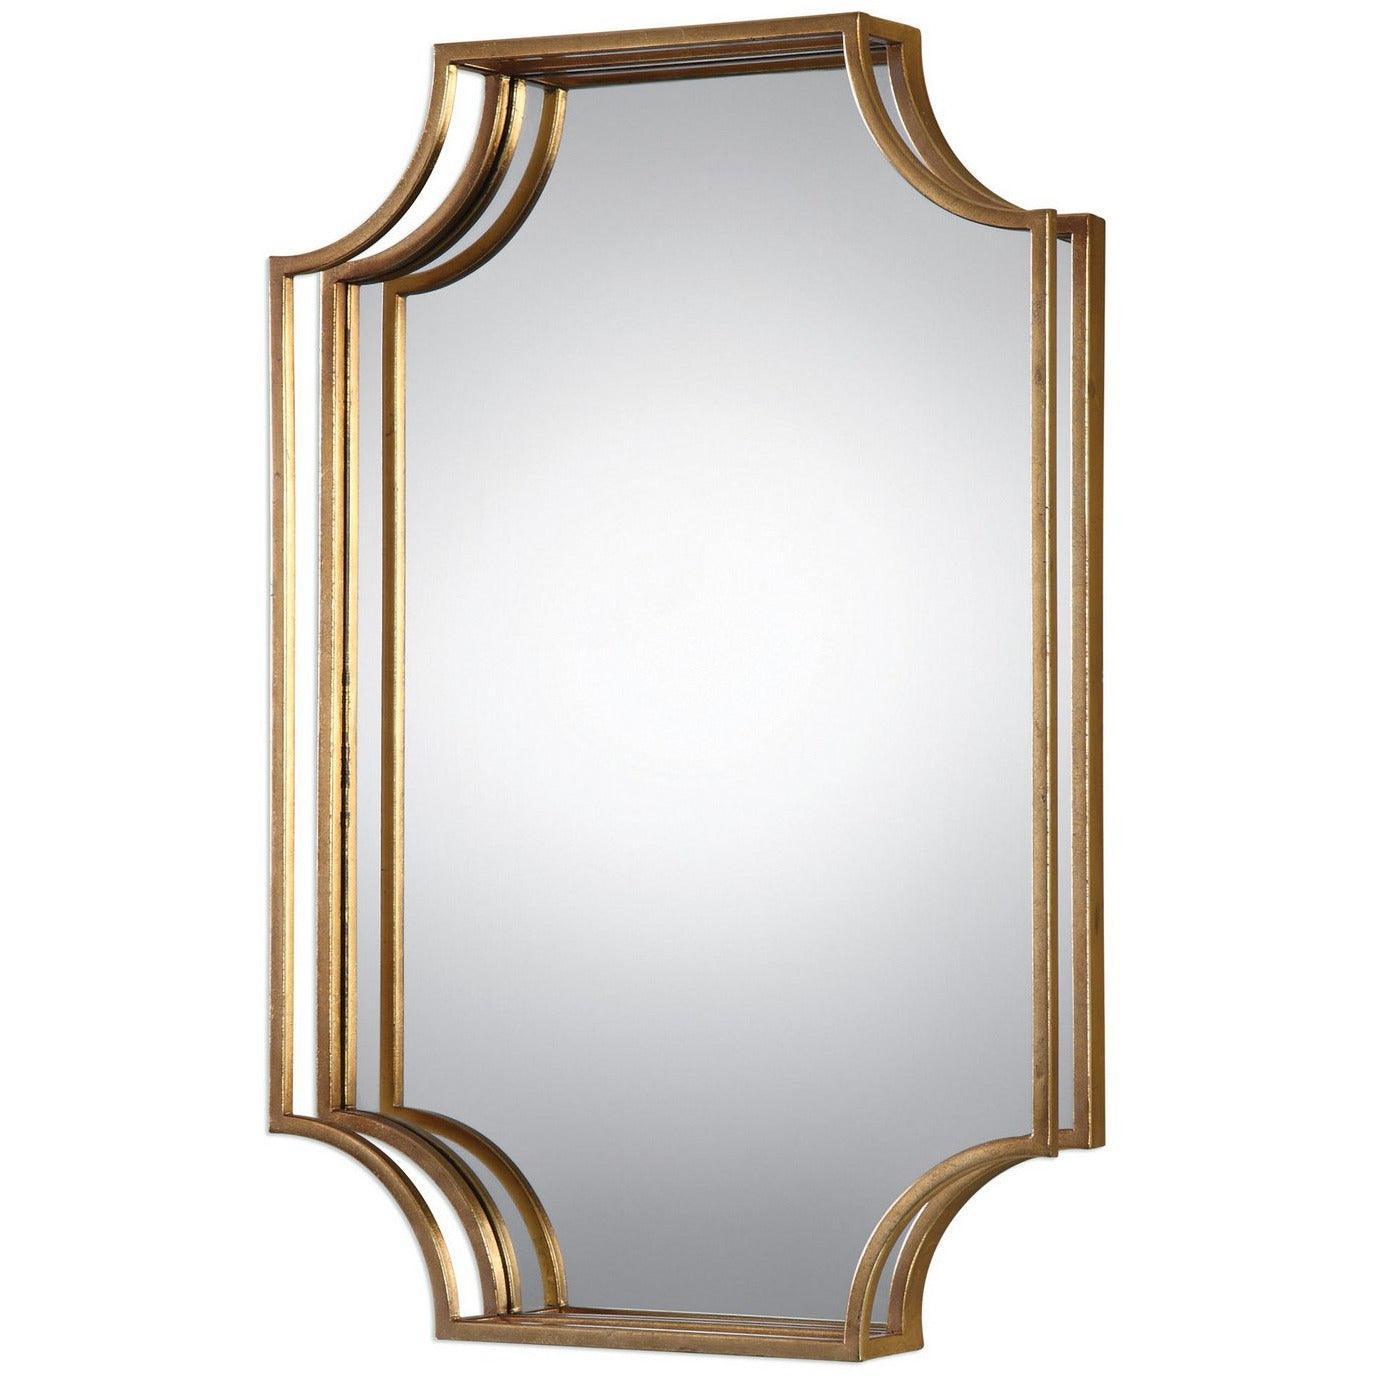 The Uttermost - Lindee Mirror - 09123 | Montreal Lighting & Hardware